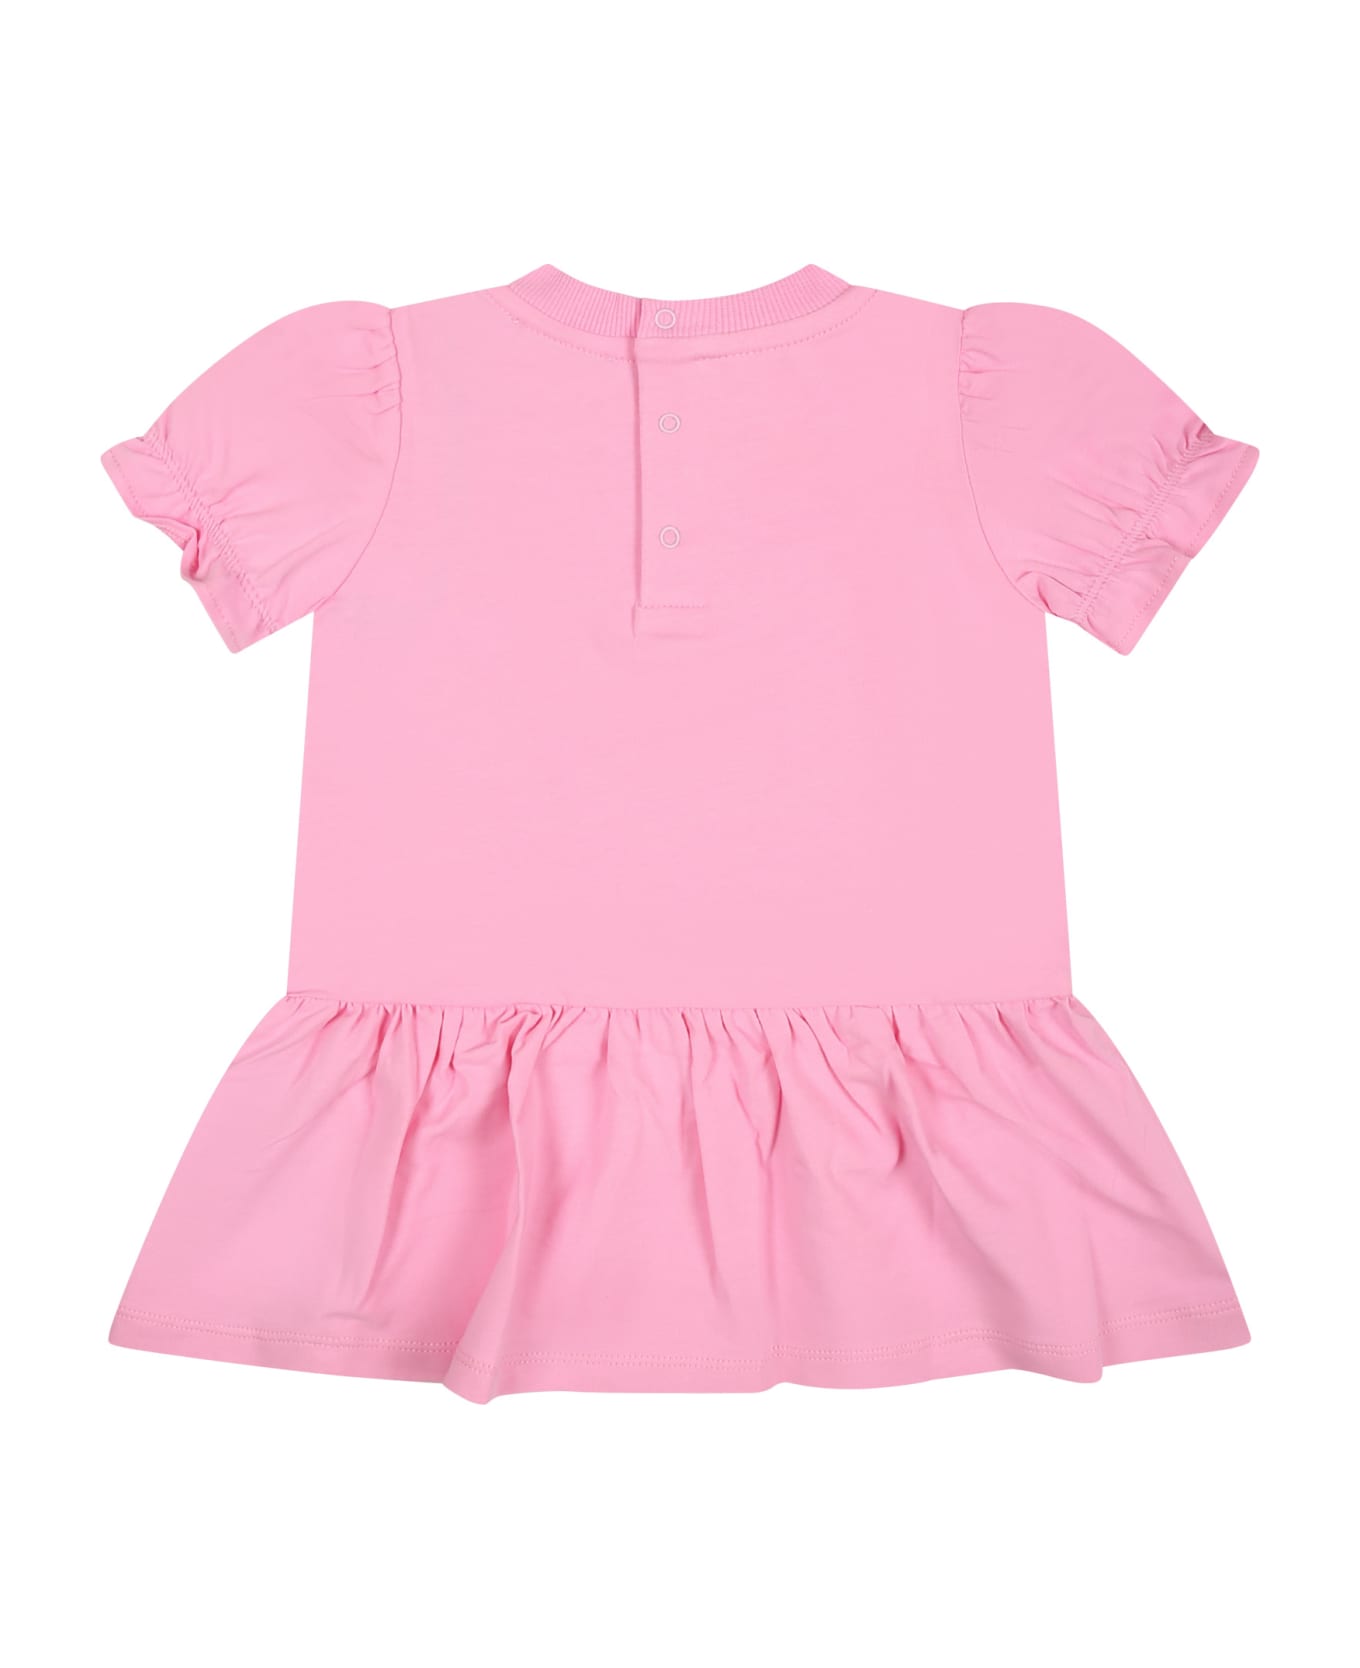 Moschino Pink Dress For Baby Girl With Teddy Bear Print - Pink ウェア